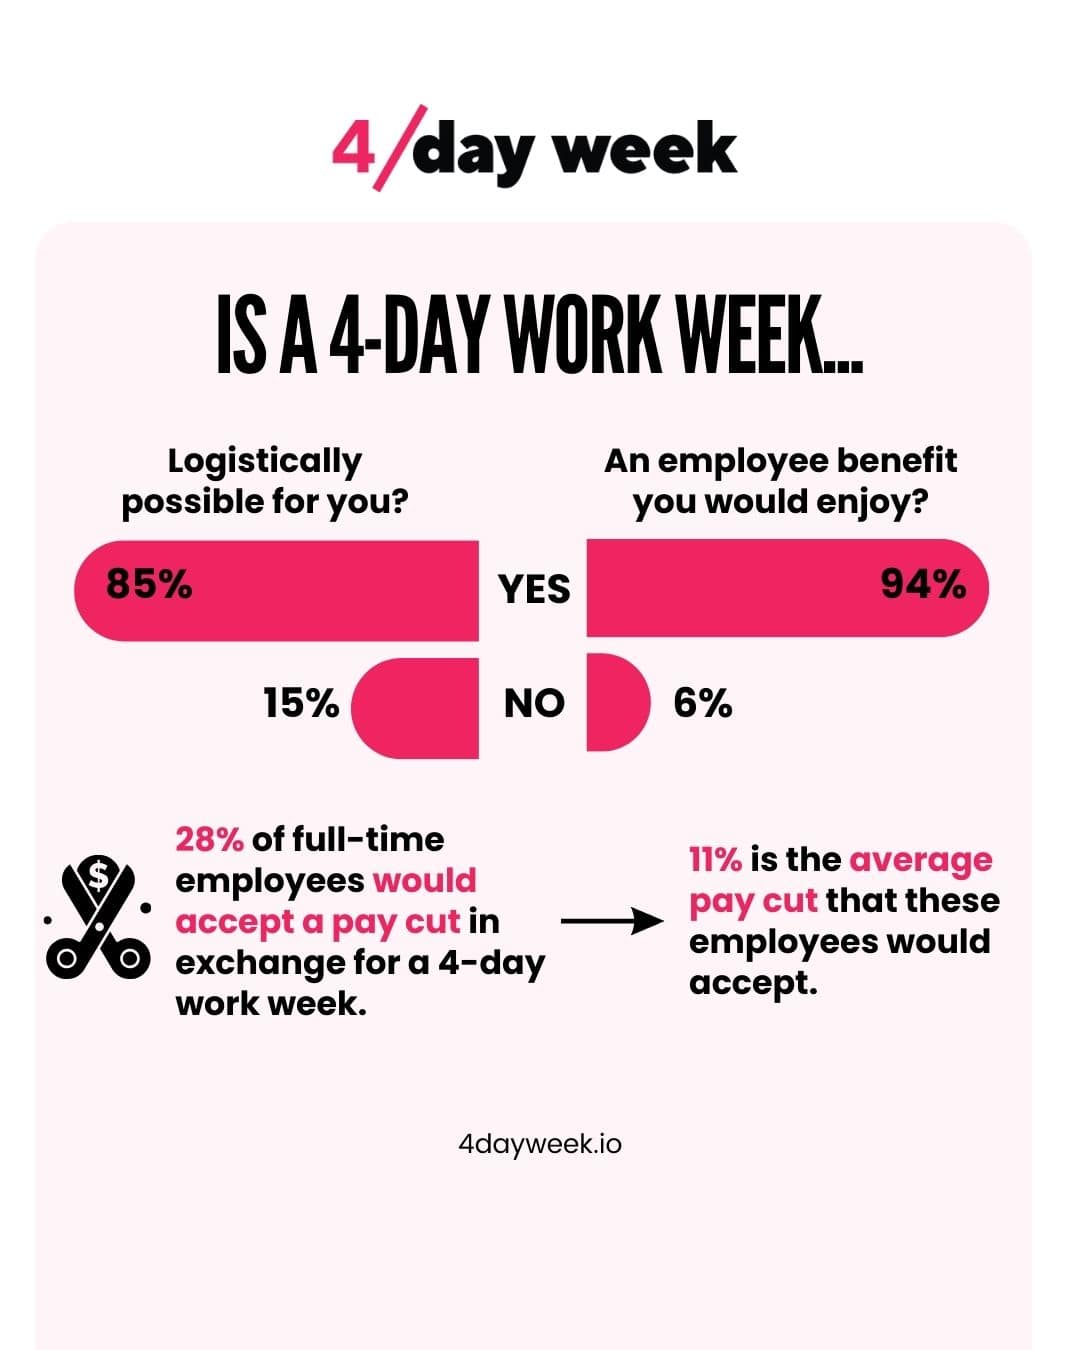  4-Day Work Week: A Closer Look at Employee Preferences
